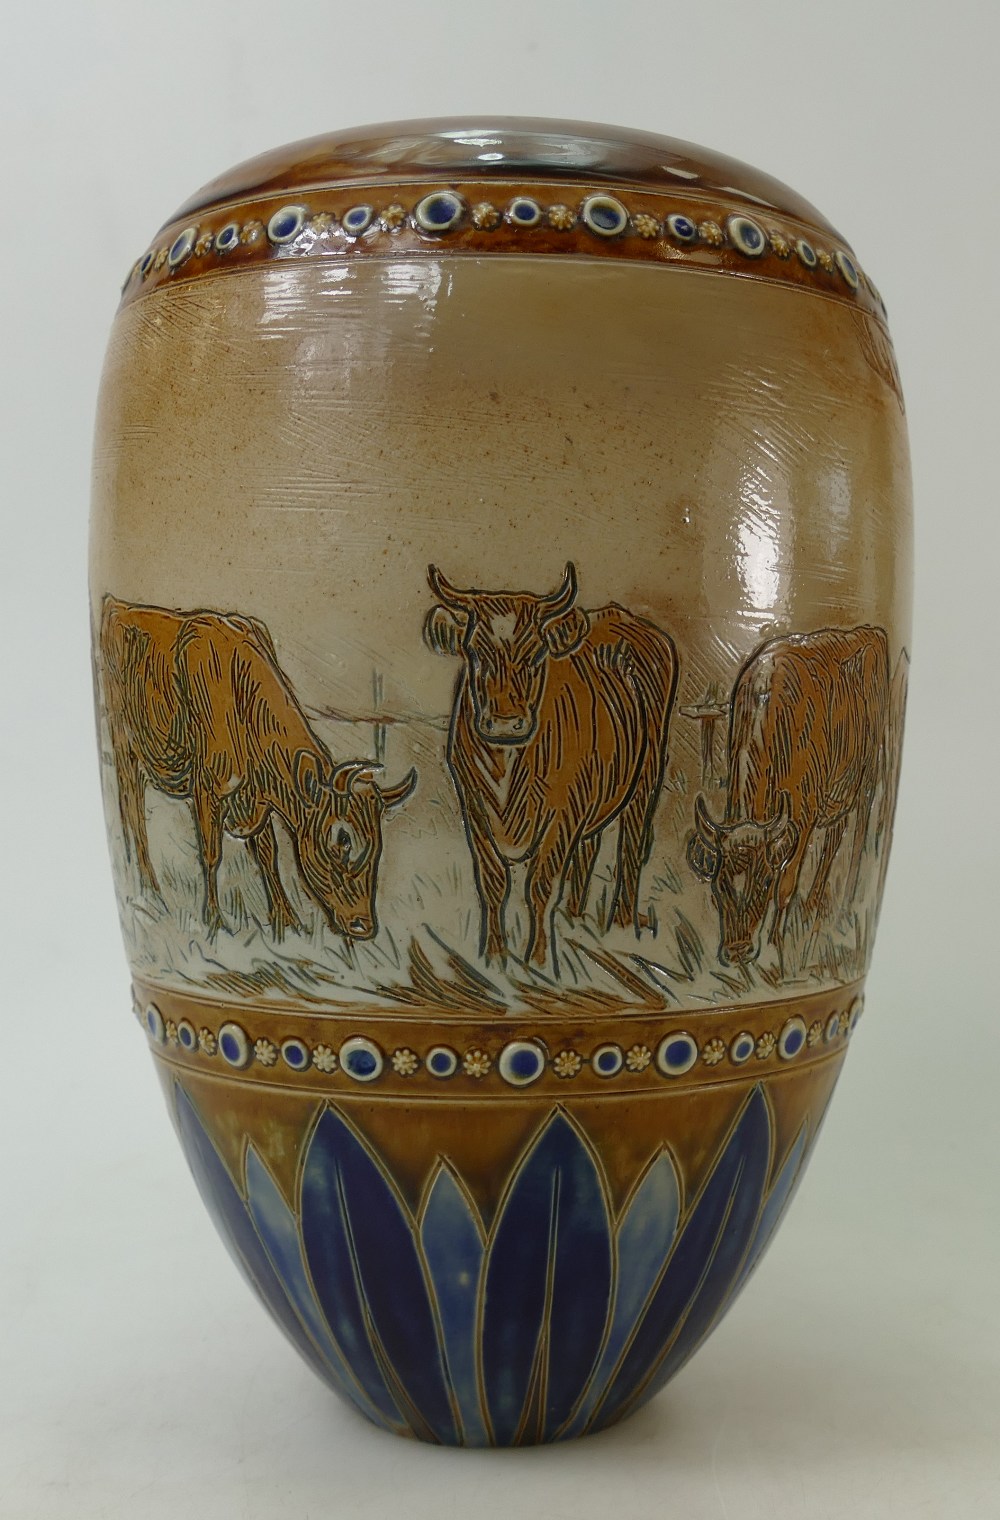 Royal Doulton Hannah Barlow vase: Vase by Royal Dolton decorated all around with cattle and donkeys - Image 3 of 5